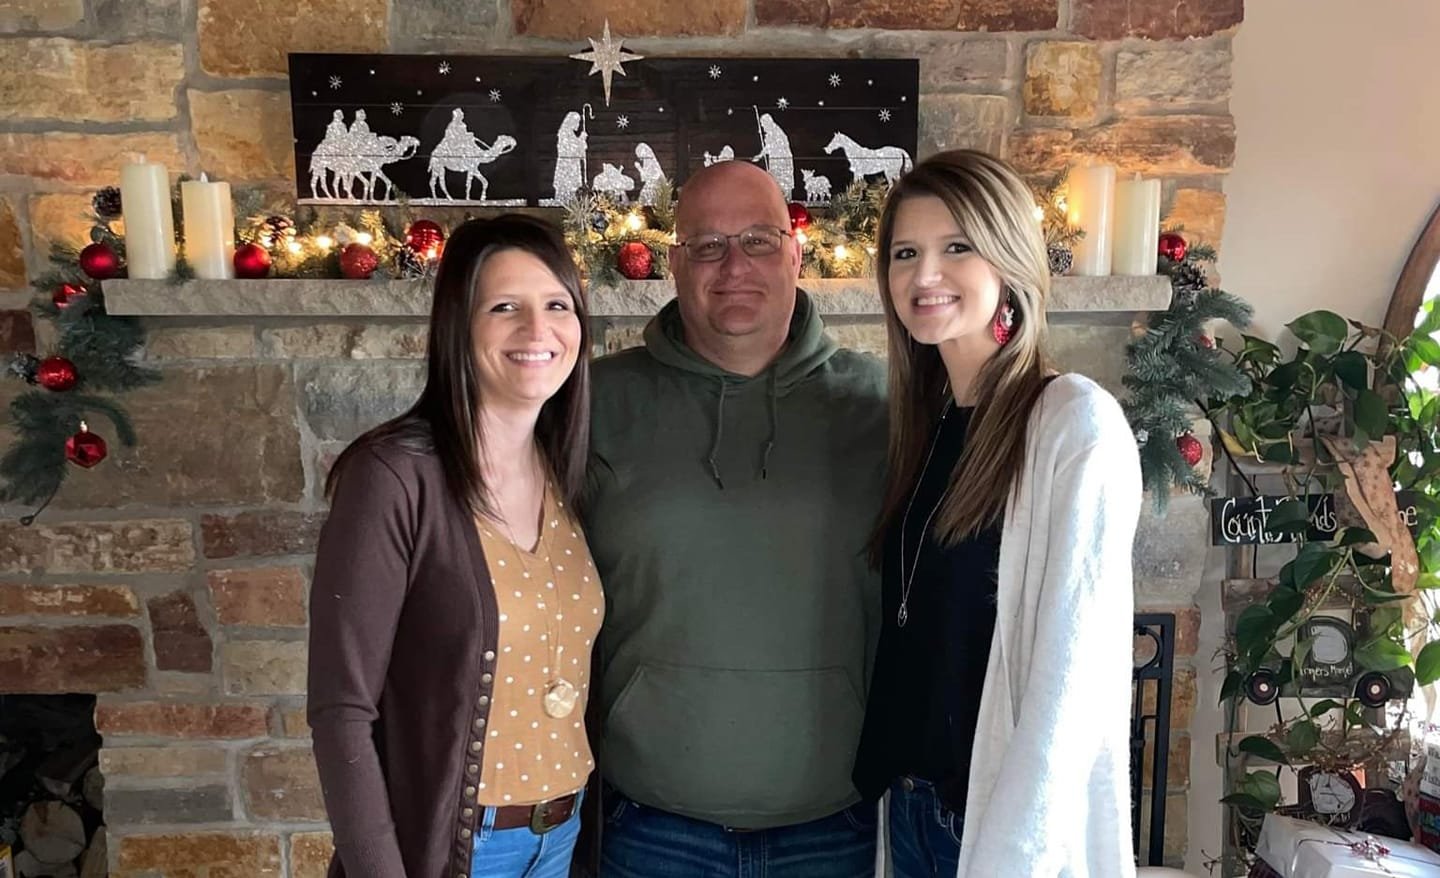 Sandy Barnhart (left) poses with her husband Izaak (center) and daughter Danielle (right). Barnhart and her family discovered an interest in goats after relocating to their new home outside of Elroy in 2018, which then led to her and her daughter developing a thriving business based on goat milk soap.